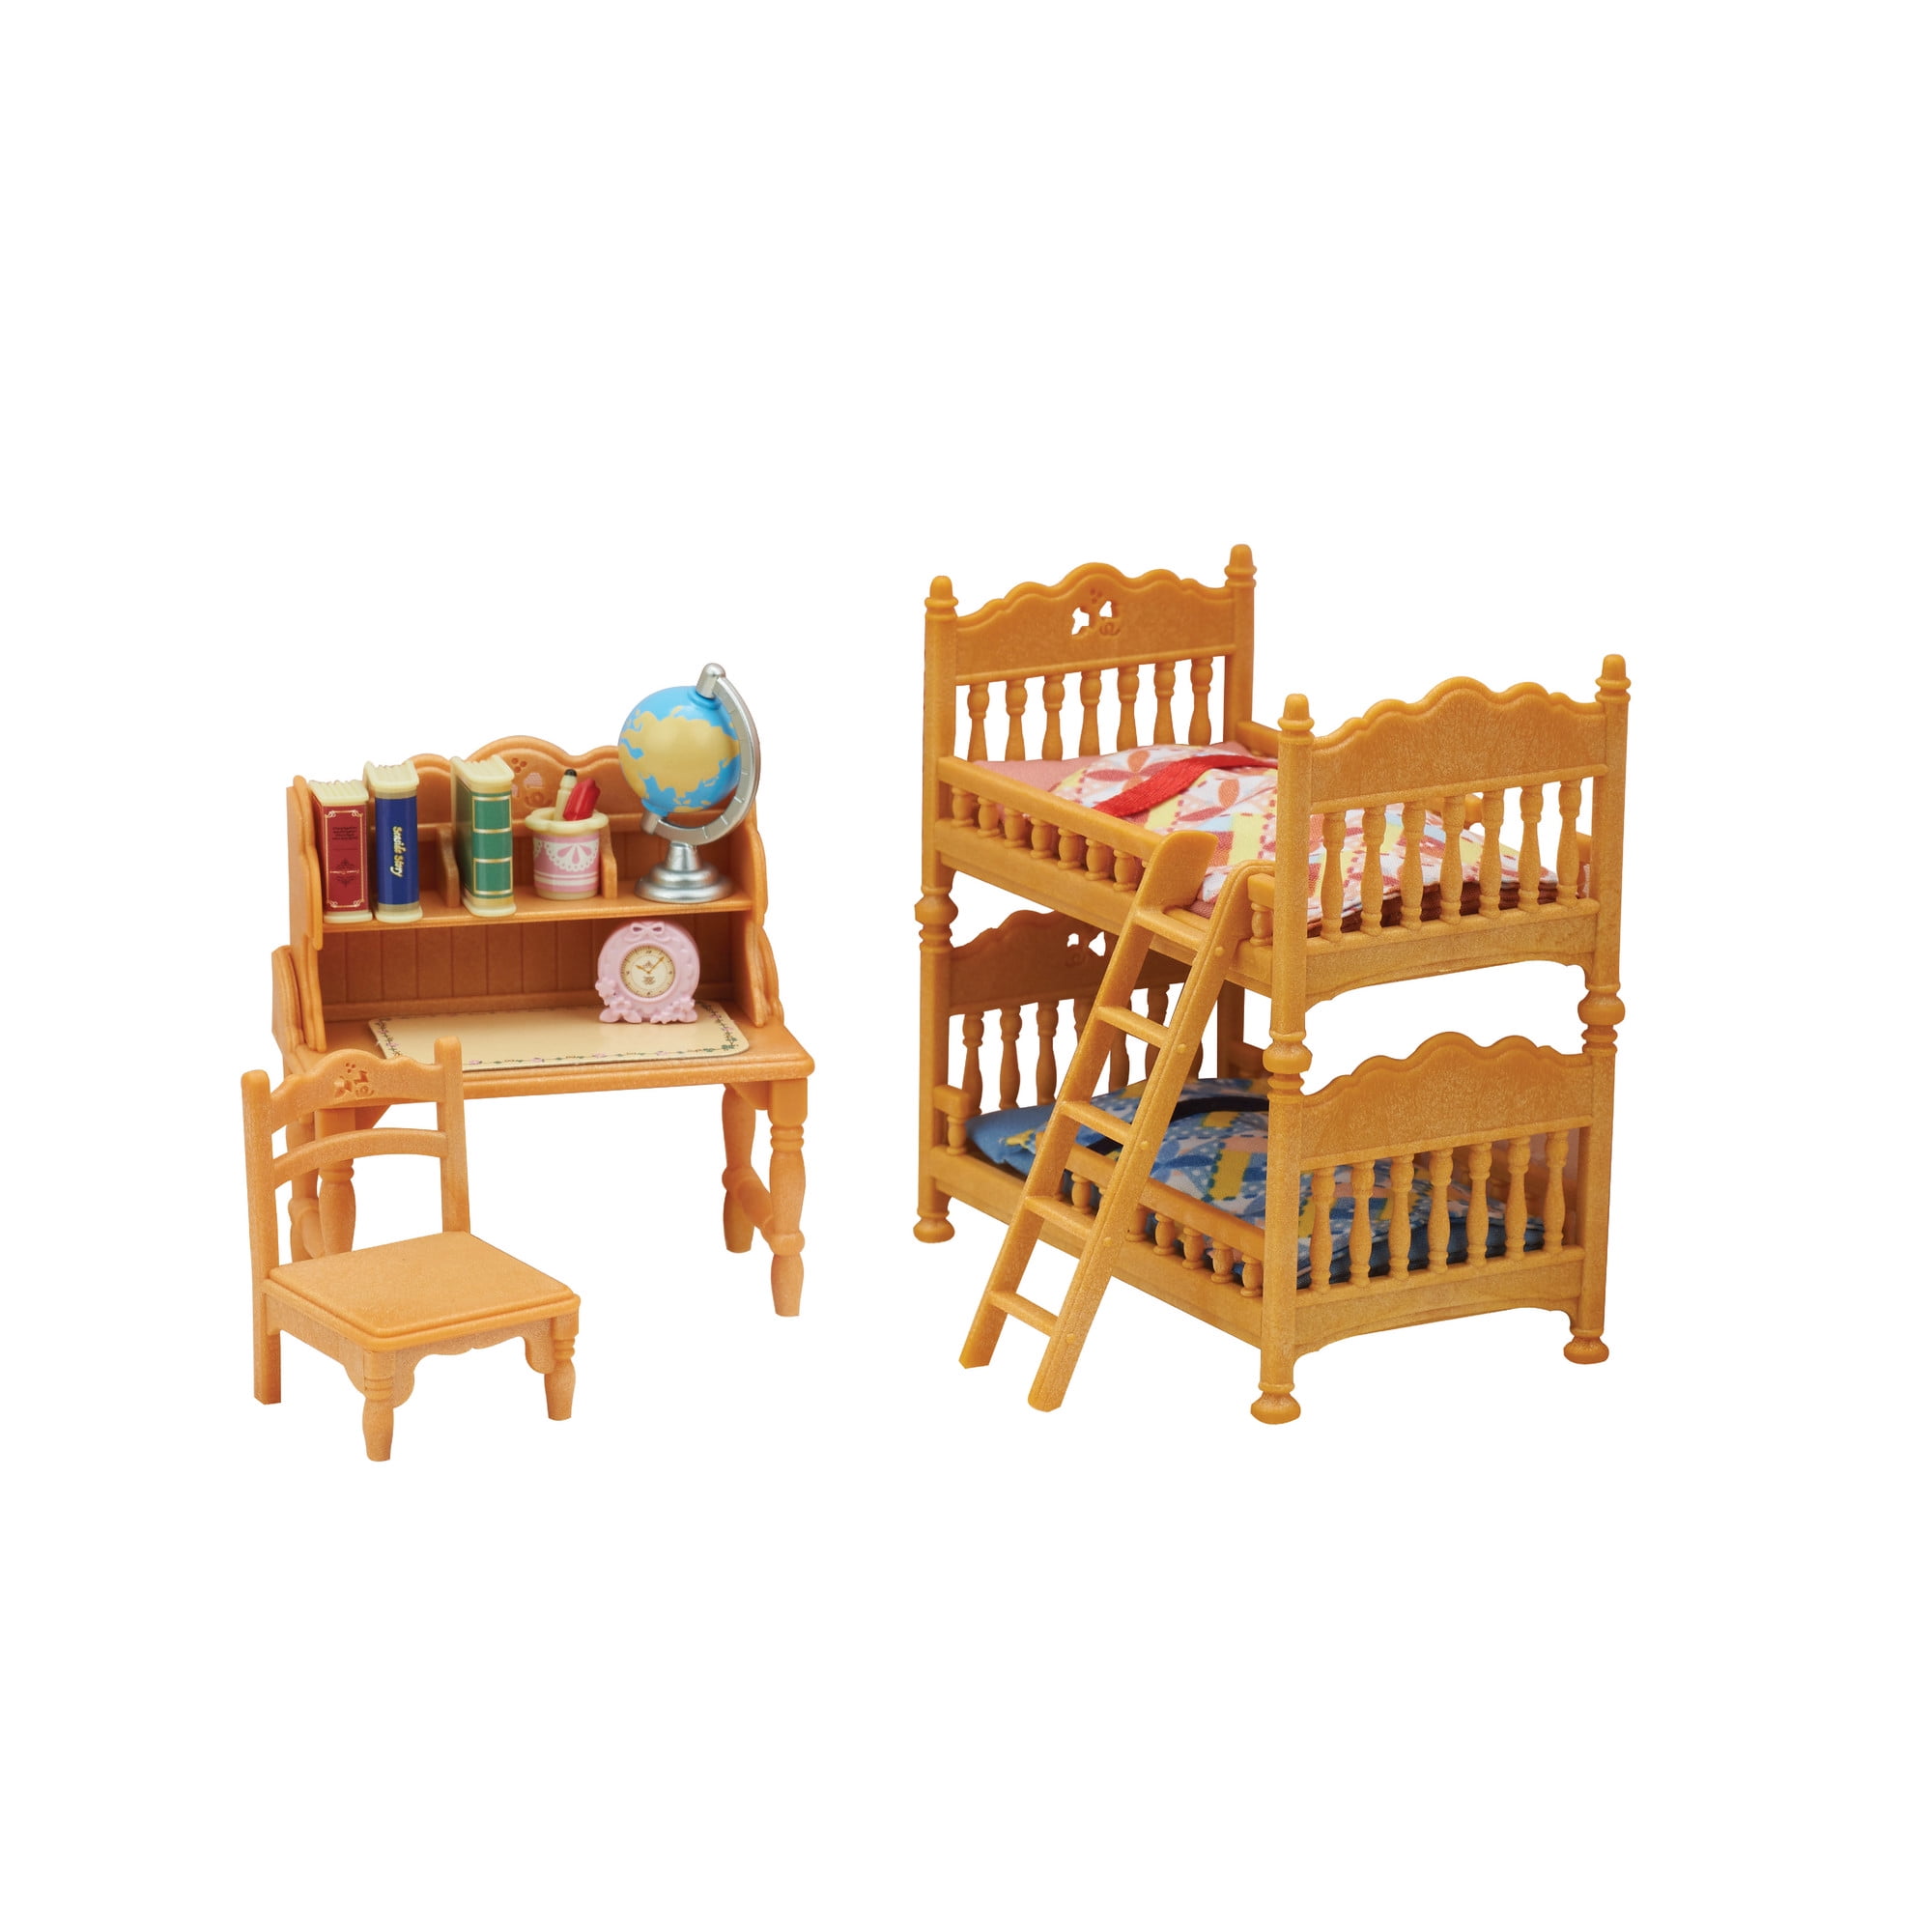 Calico Critters Bunk Beds Doll Furniture Bed Set For Mini Figure Toy Hedgedog 